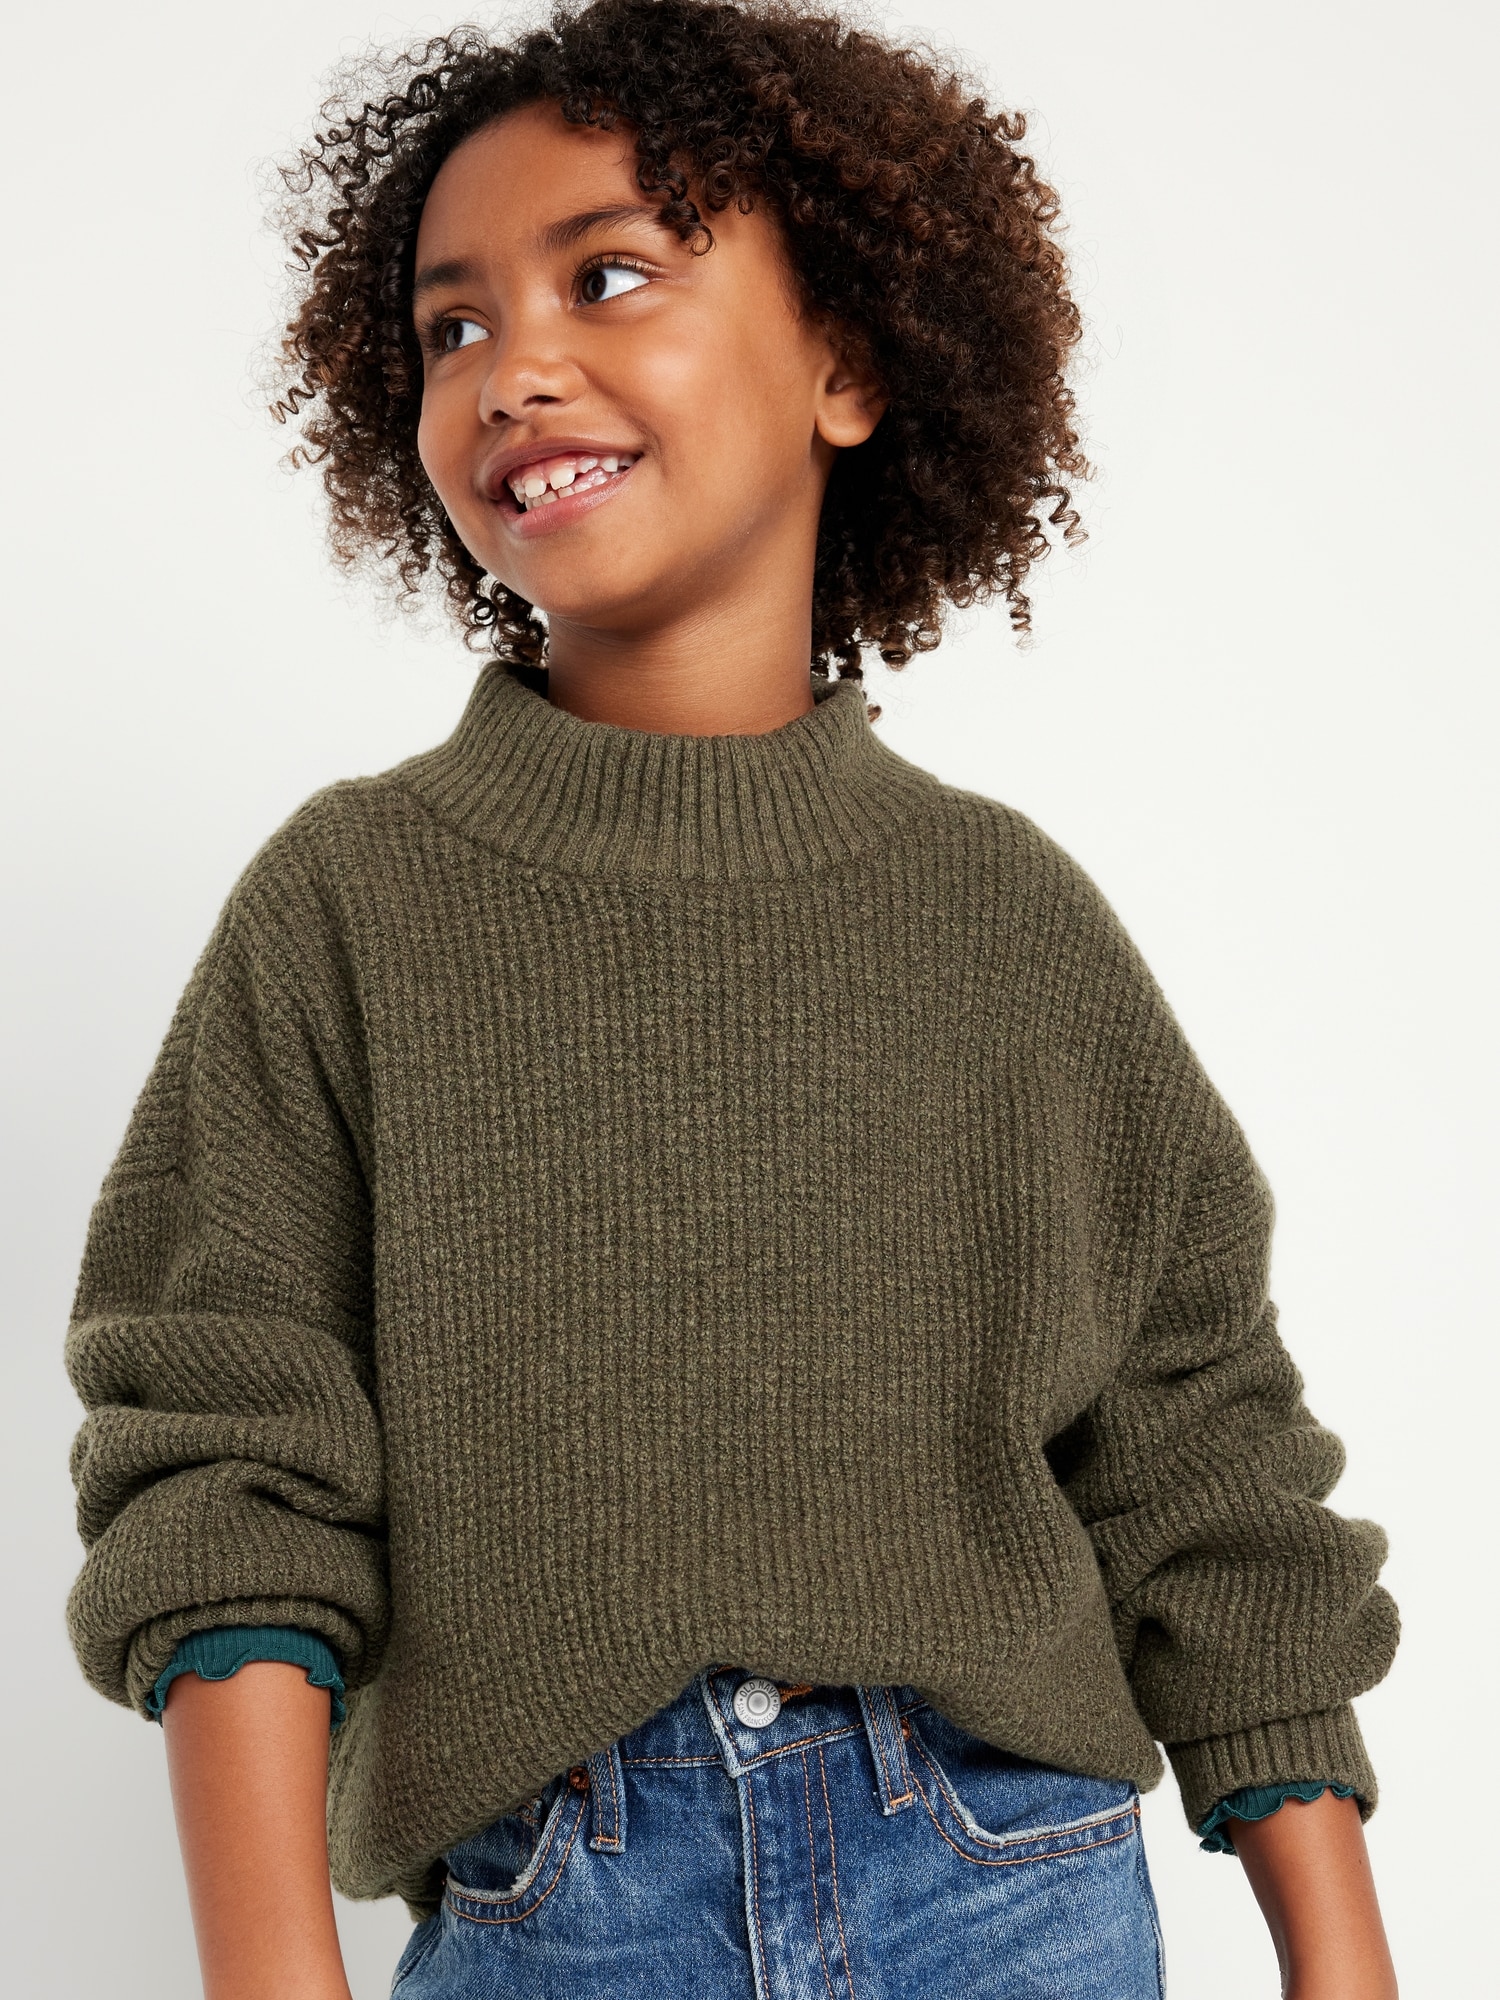 Cozy Thermal-Knit Mock-Neck Tunic Pullover Sweater for Girls